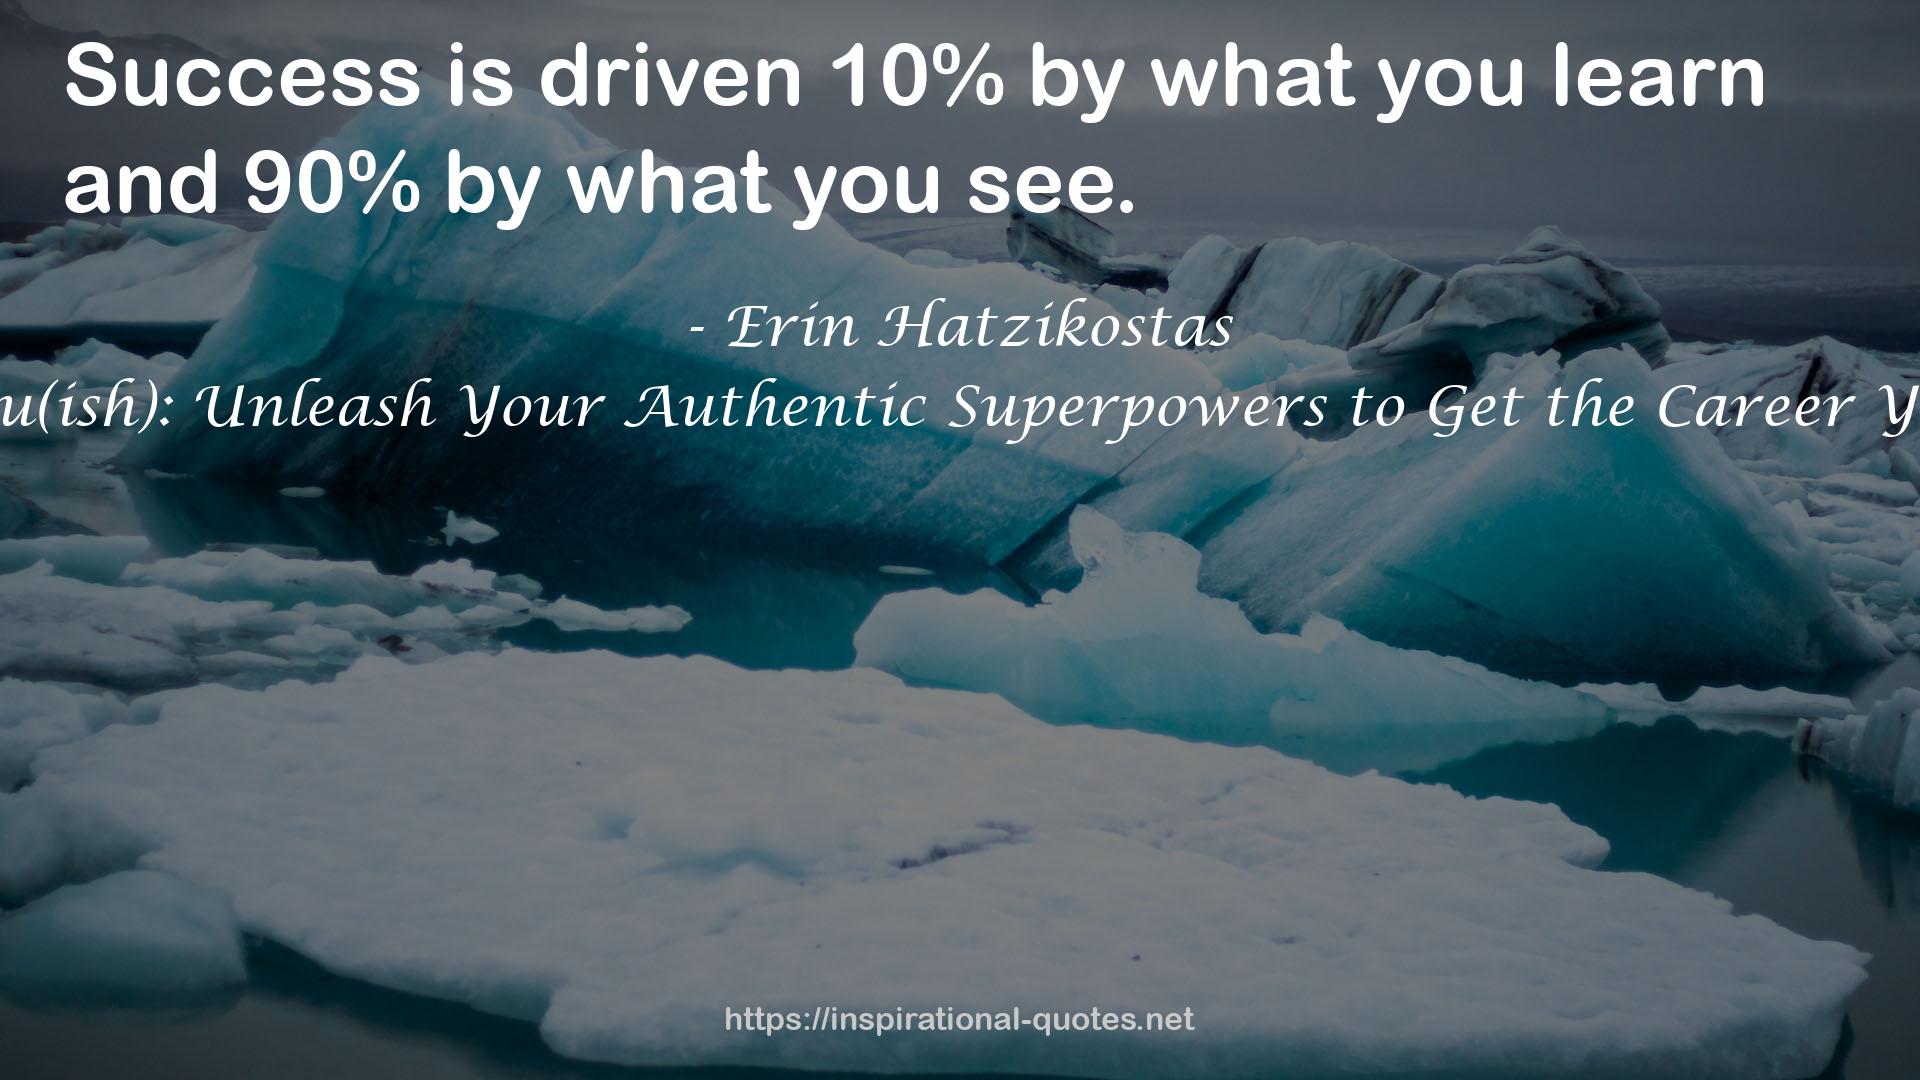 You Do You(ish): Unleash Your Authentic Superpowers to Get the Career You Deserve QUOTES